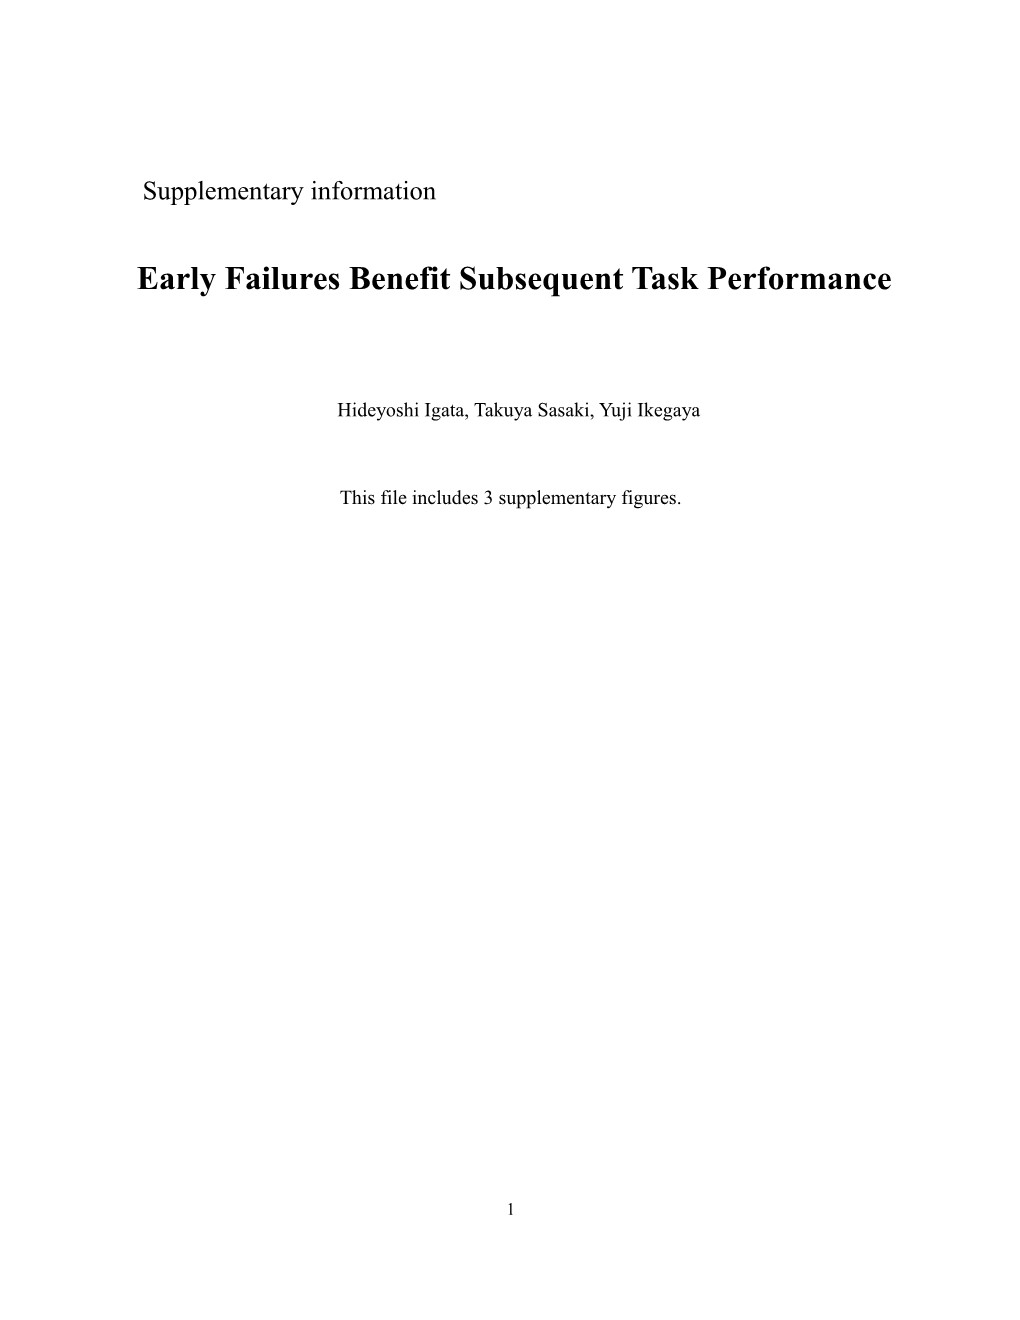 Early Failures Benefit Subsequent Task Performance